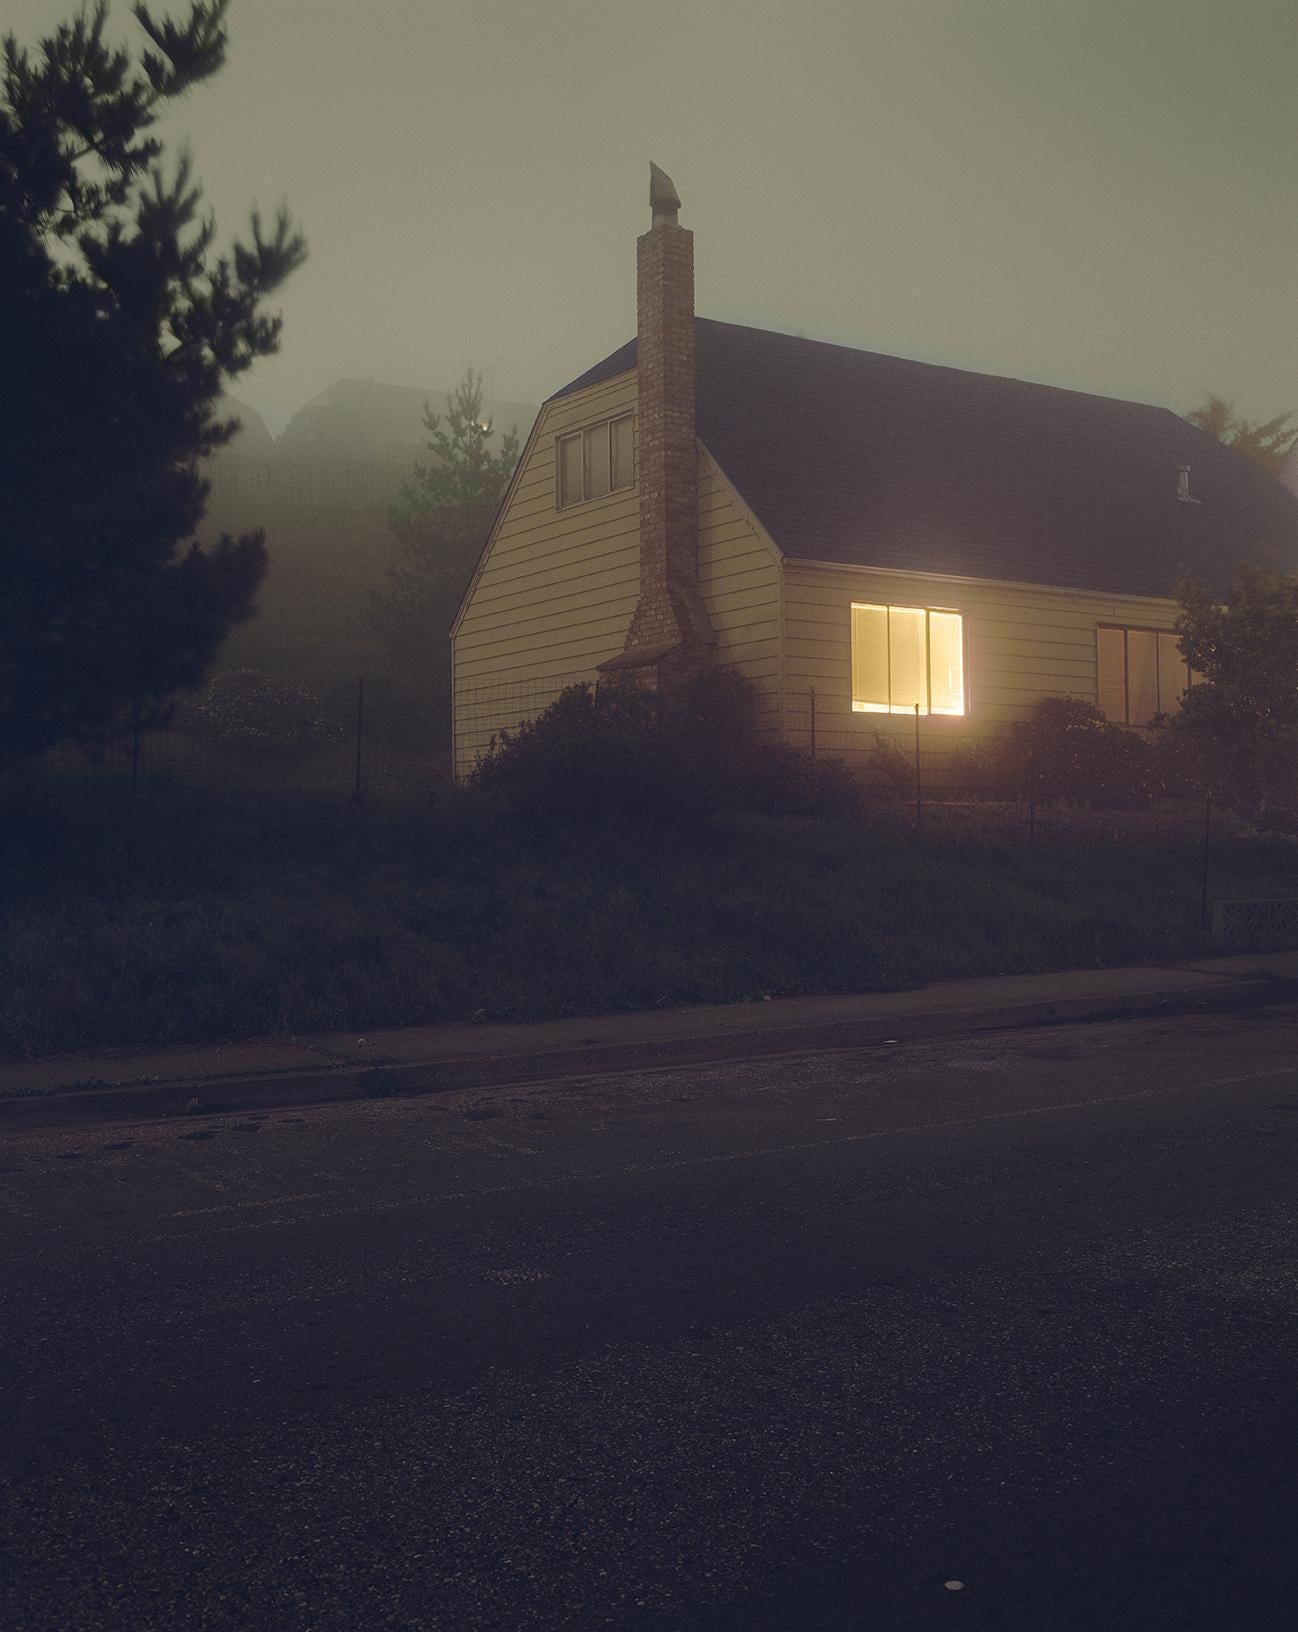 Signed, titled and dated on reverse
Archival pigment print

Available in three sizes:
24 x 20 inches, from an edition of 10 + 3 APs - SOLD OUT
38 x 30 inches, from an edition of 5 + 2 APs
48 x 38 inches, from an edition of 3 + 2 APs

Todd Hido (born